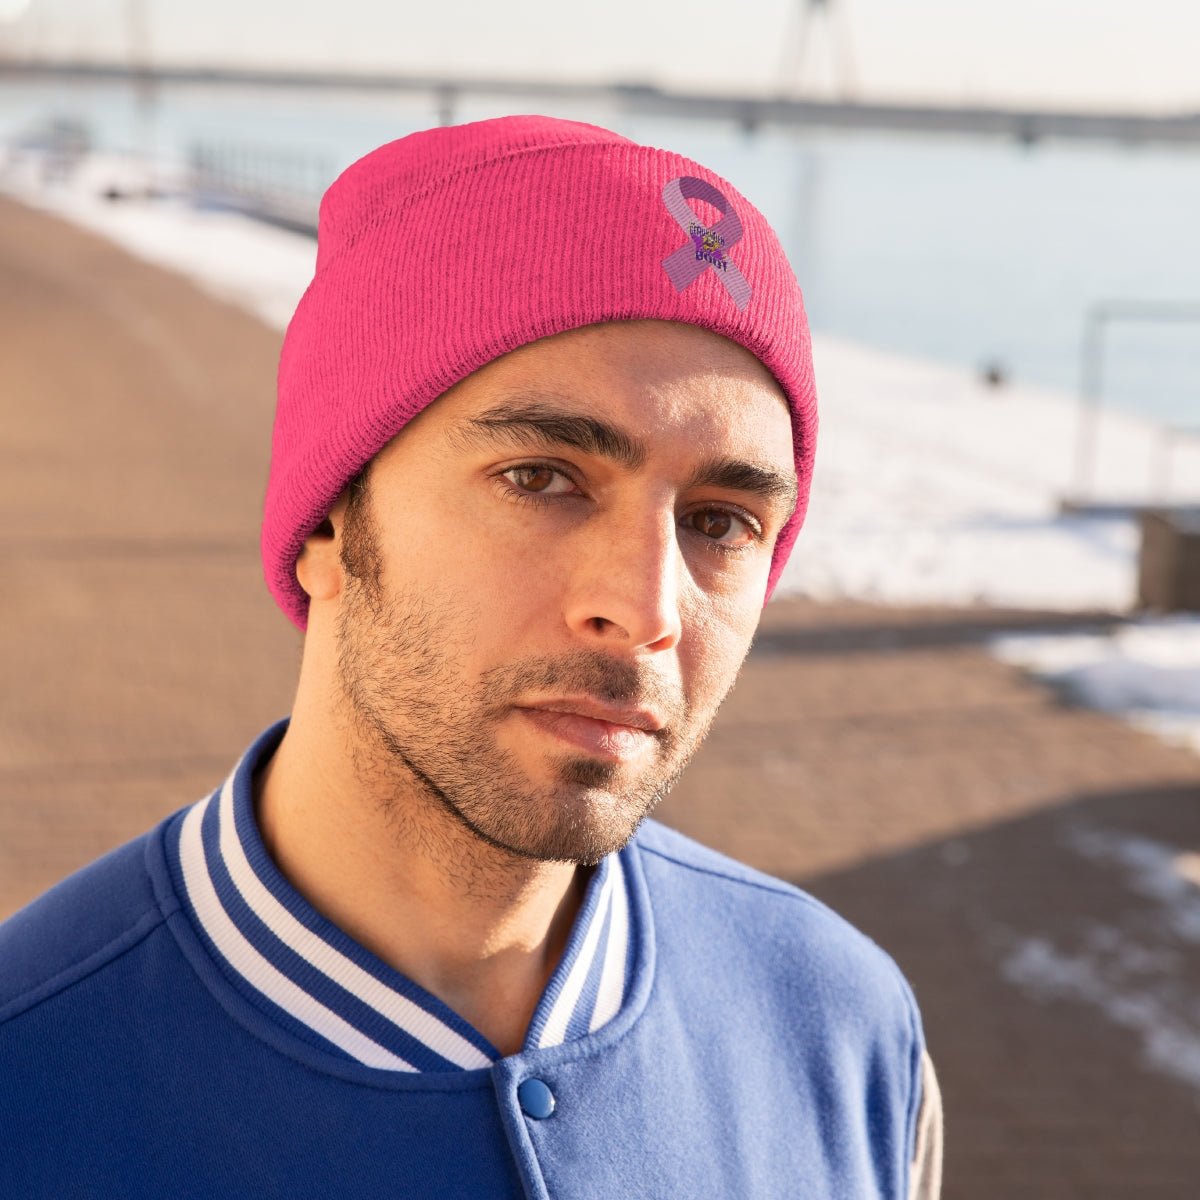 Pink Ribbon Campaign Knit Beanie